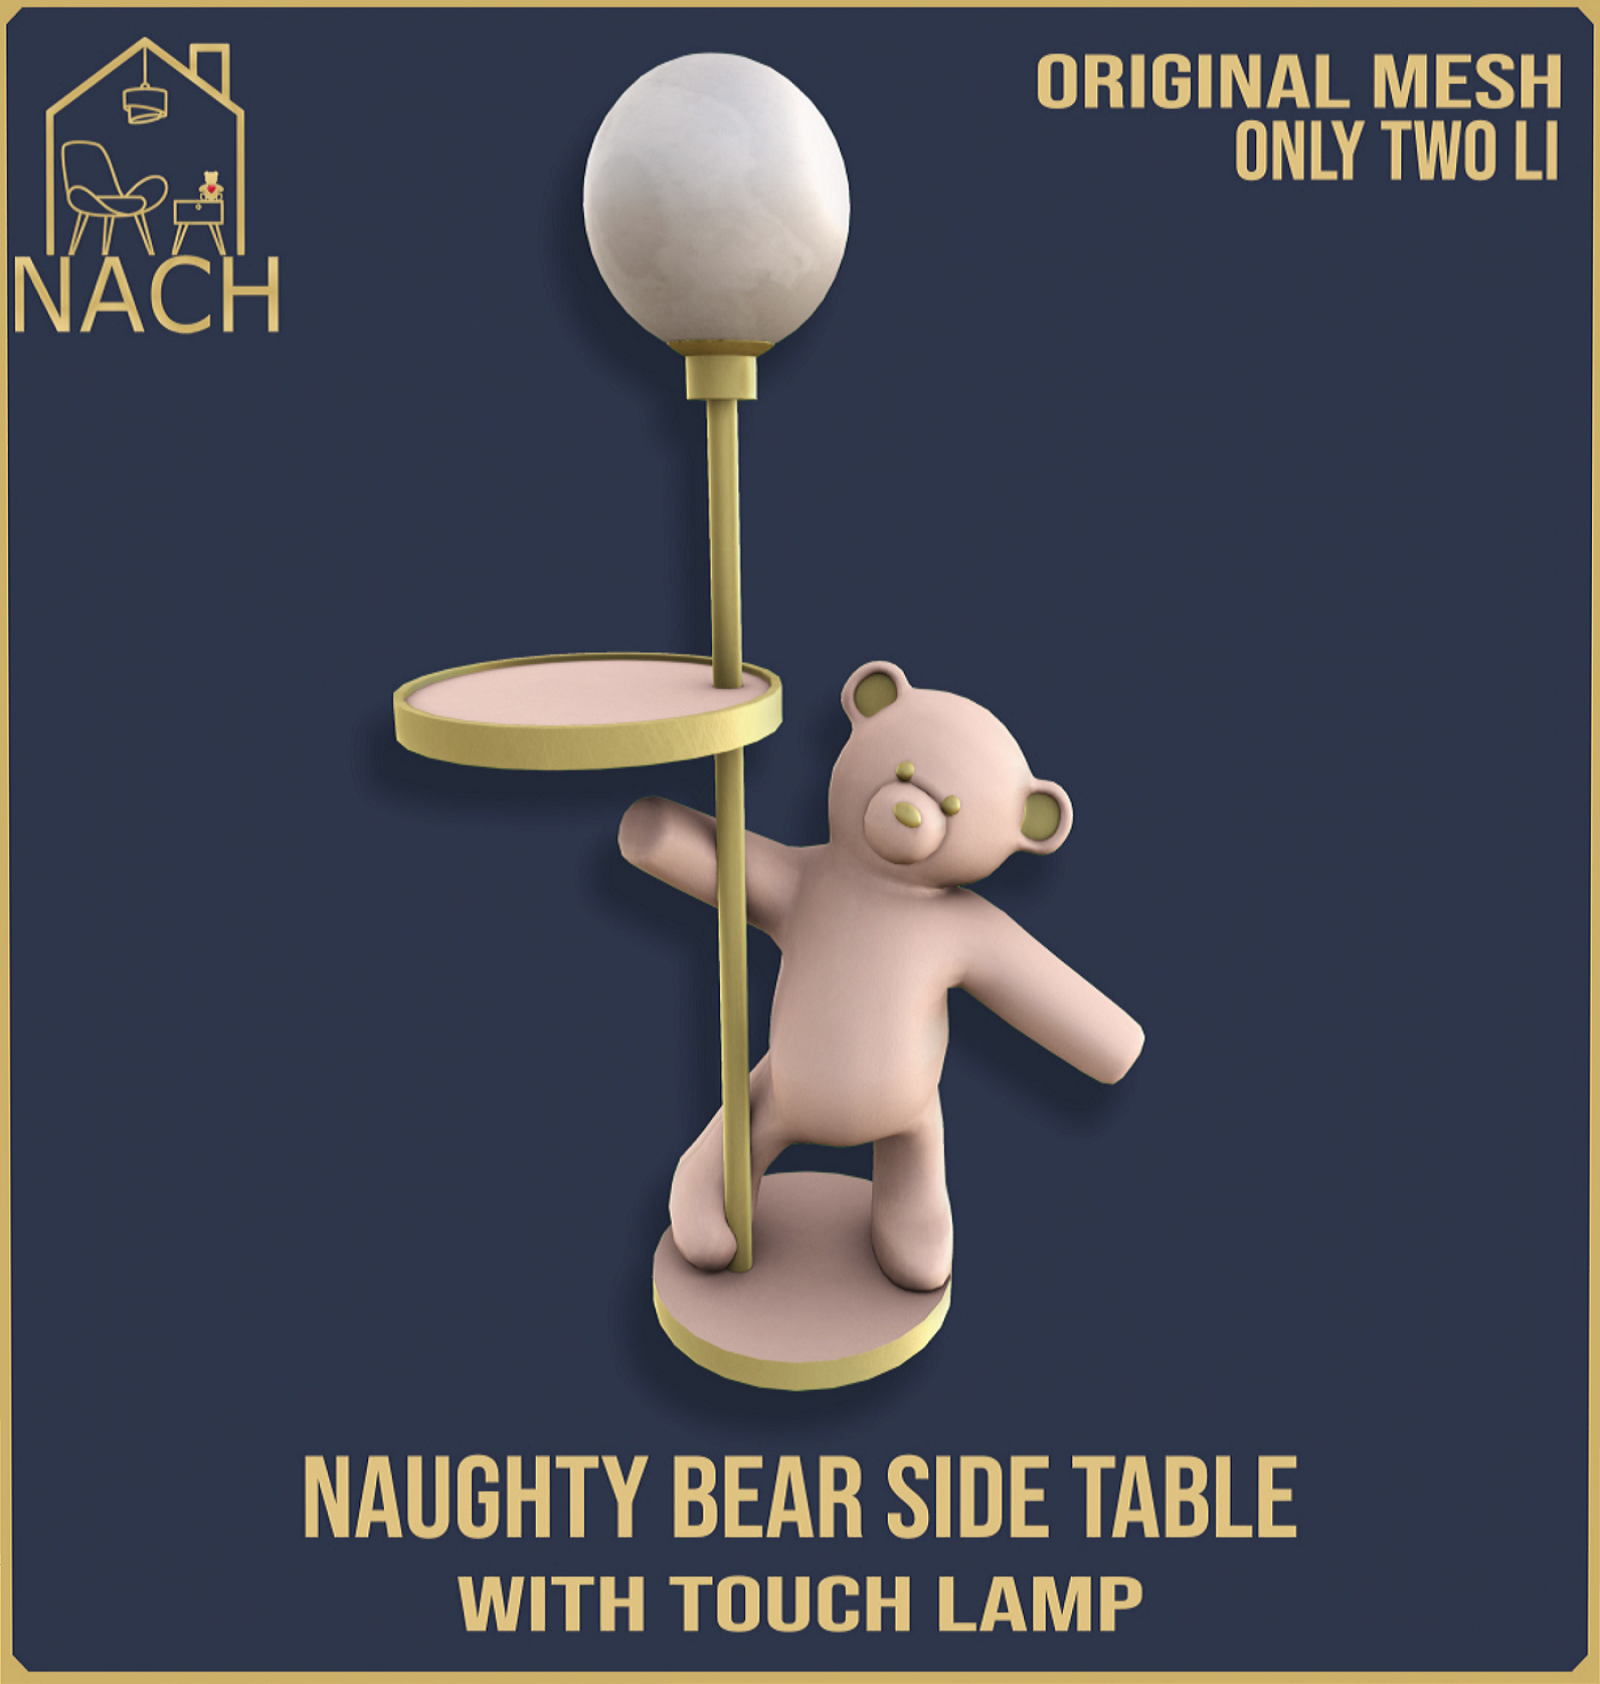 Nach – Naughty Bear Side Table With Lamp